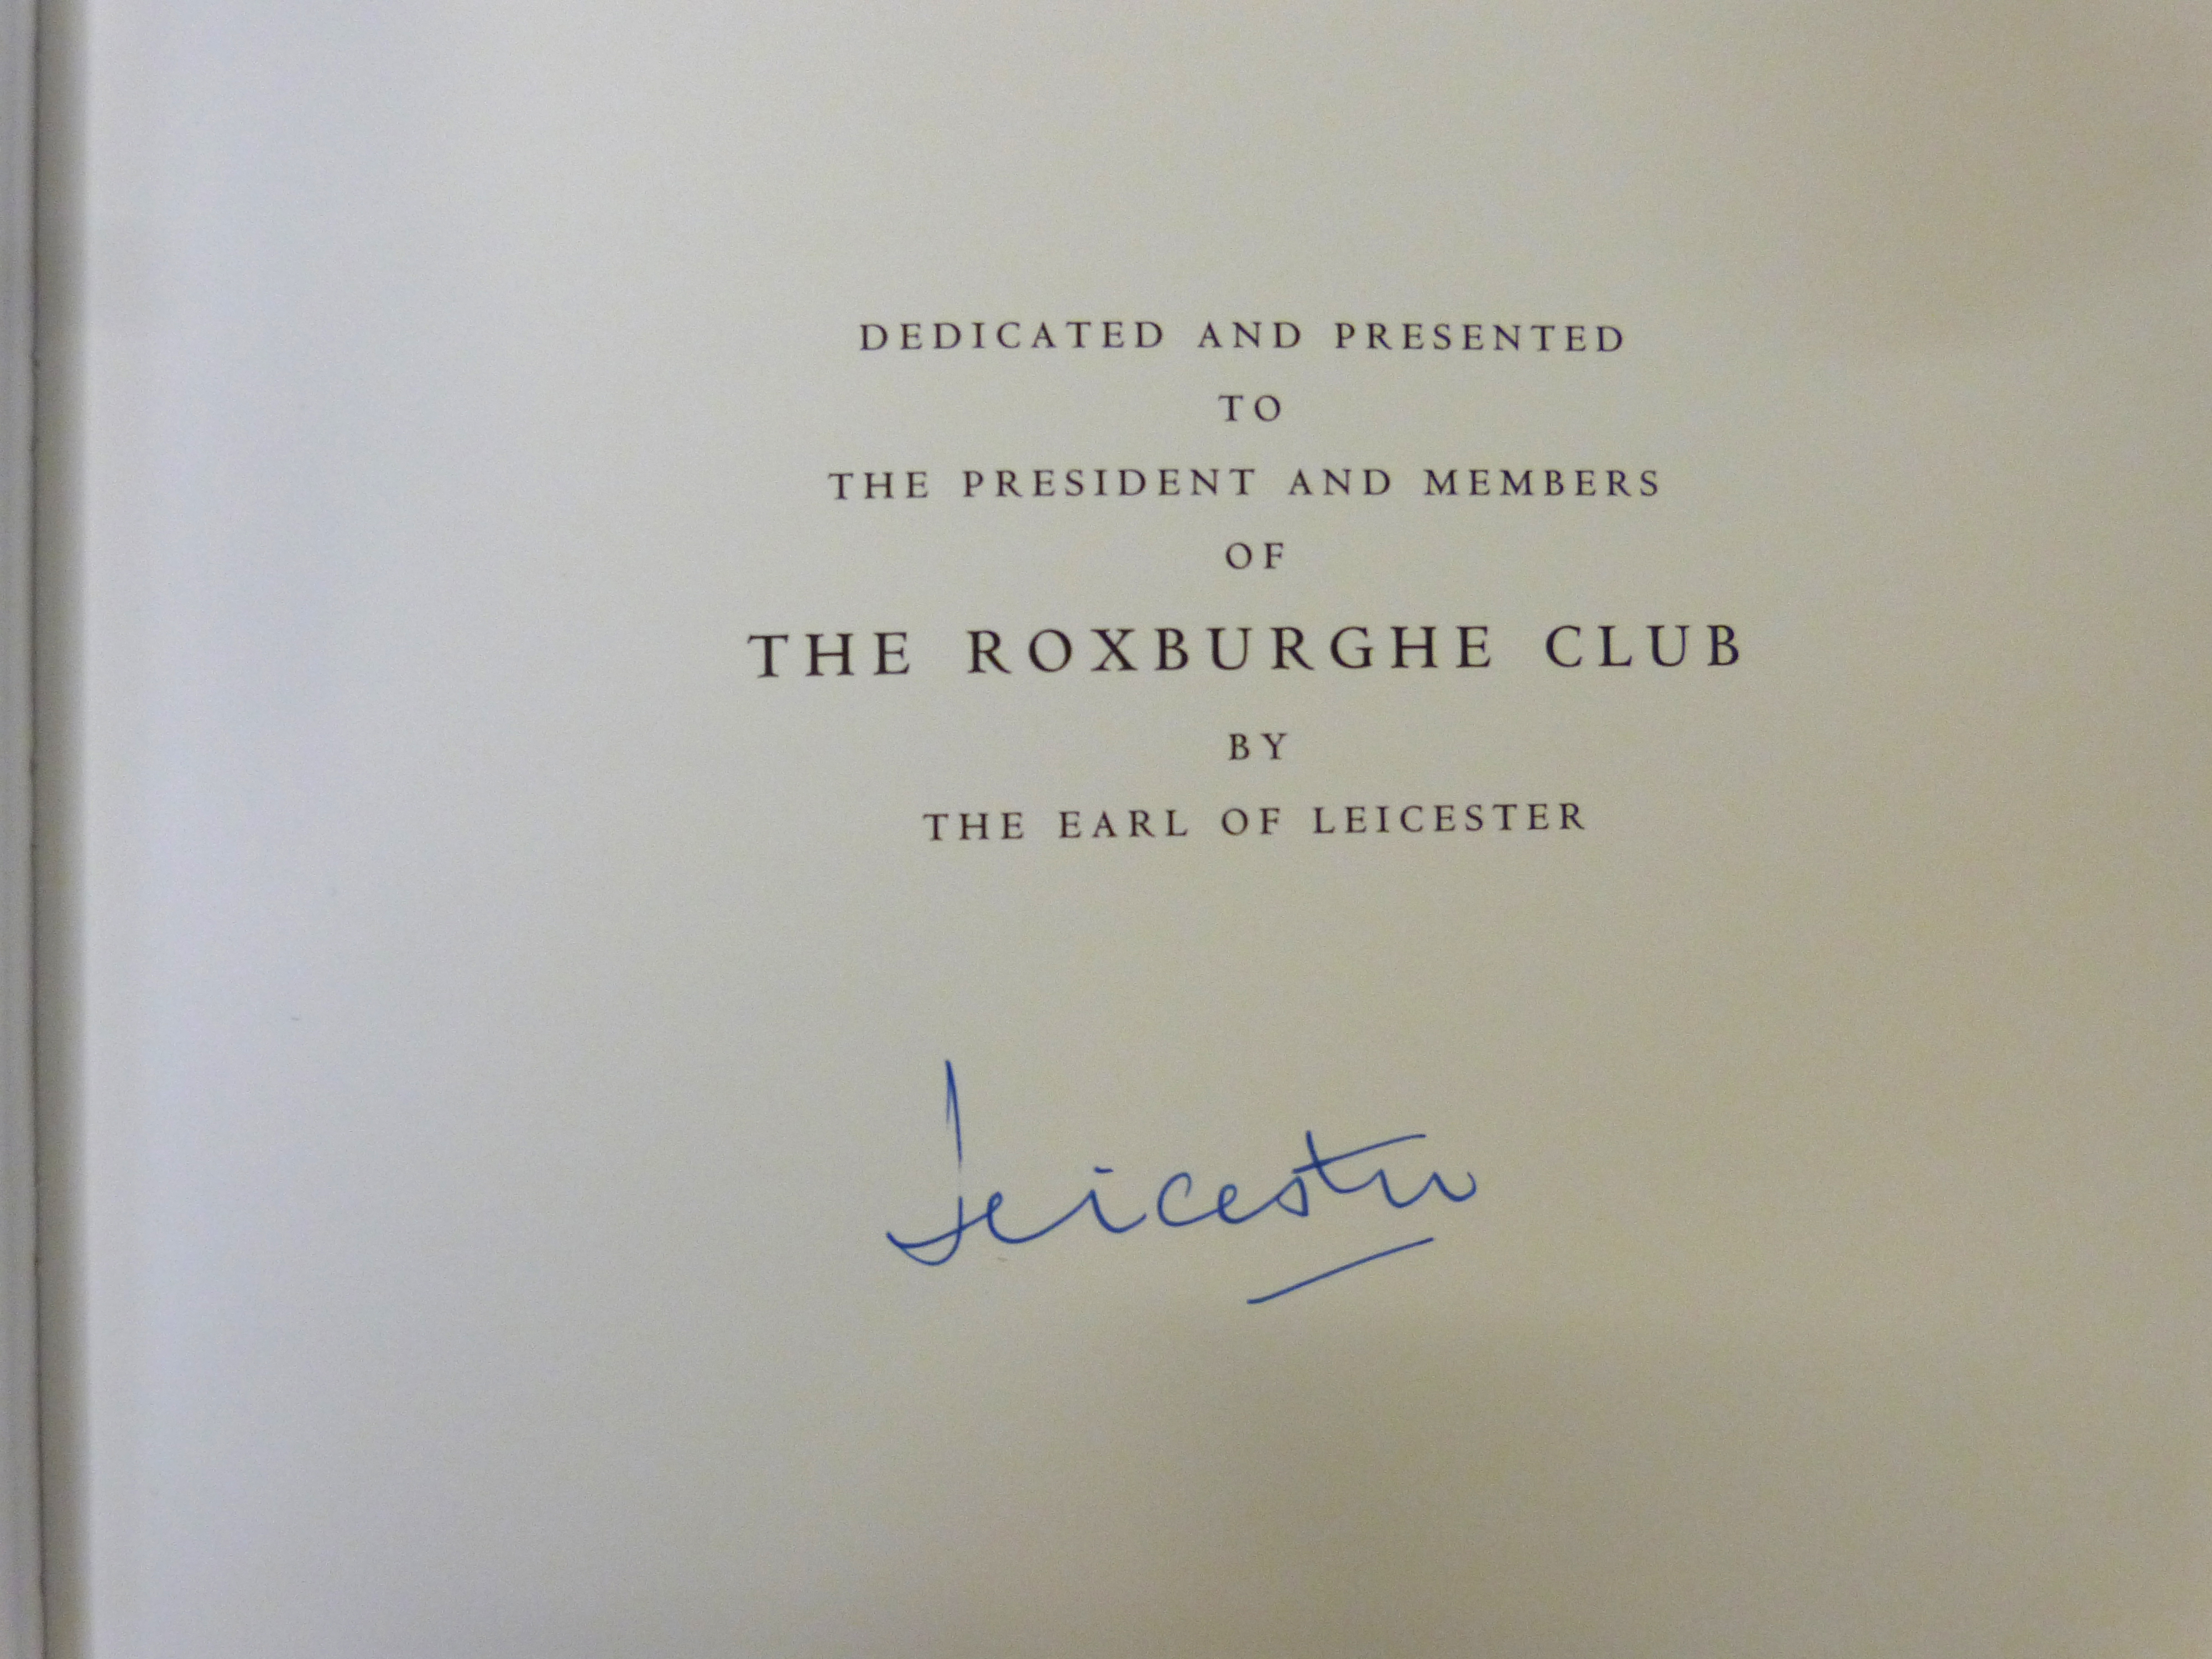 D P MORTLOCK: HOLKHAM LIBRARY, A HISTORY AND DESCRIPTION, foreword The Earl of Leicester, [London] - Image 2 of 5